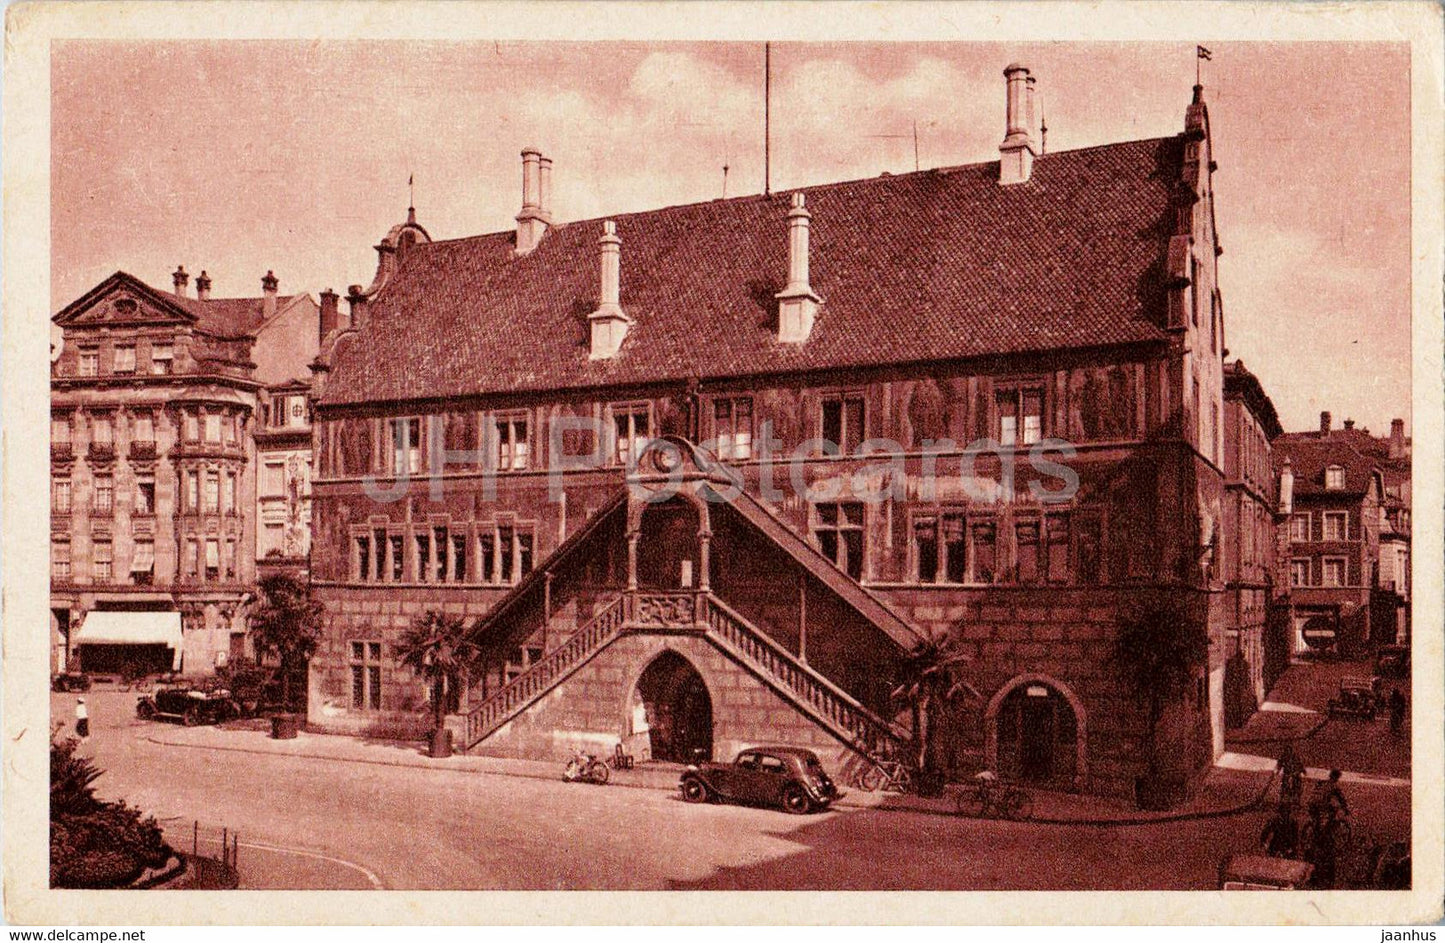 Mulhausen - Rathaus - car - town hall - old postcard - 1944 - Germany - used - JH Postcards